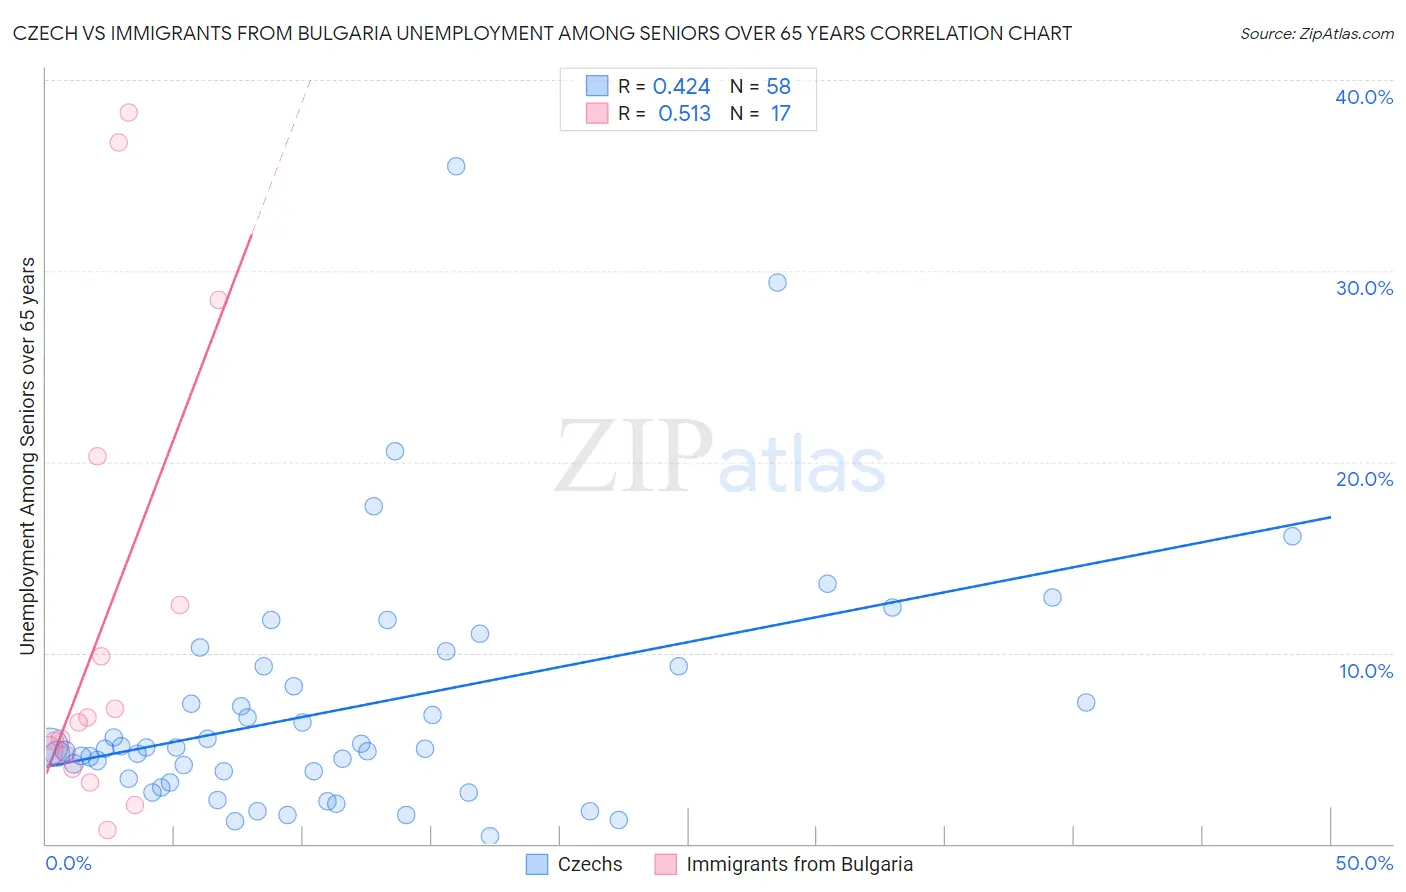 Czech vs Immigrants from Bulgaria Unemployment Among Seniors over 65 years